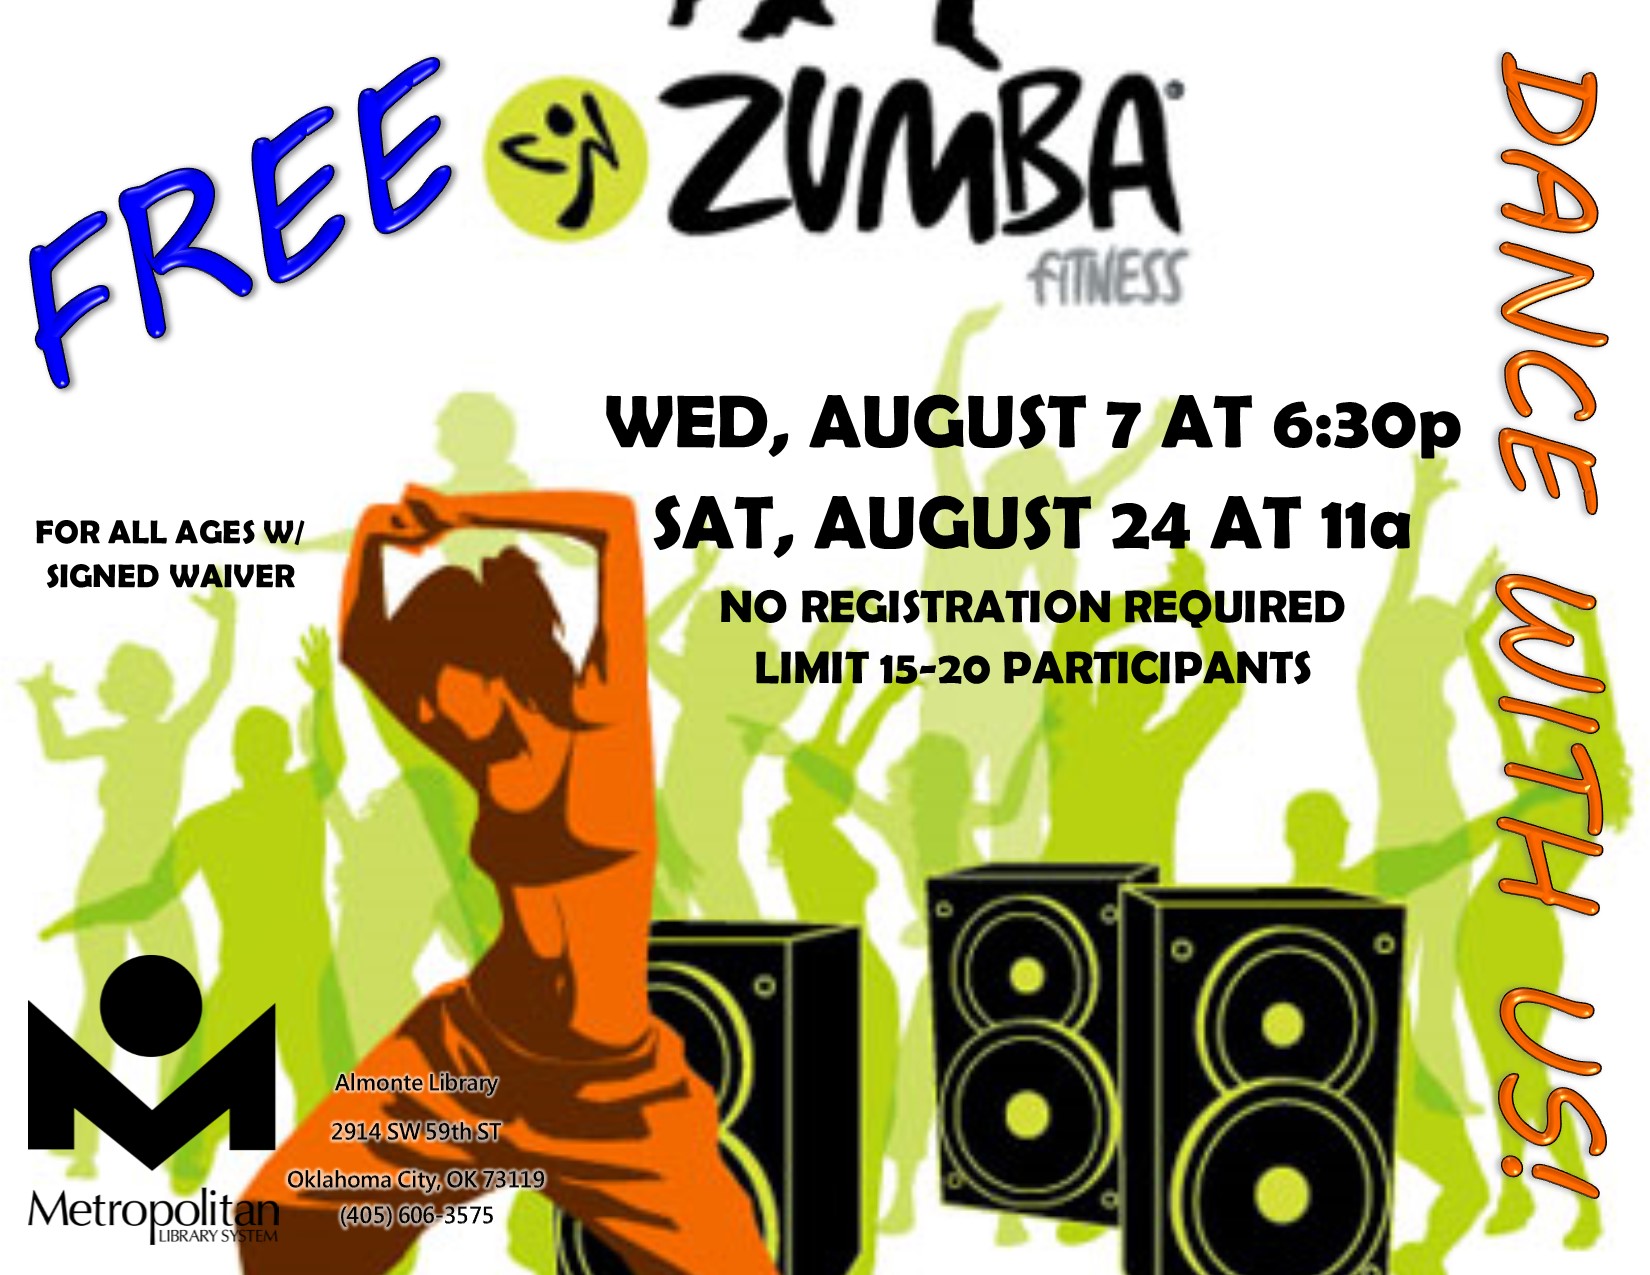 FREE ZUMBA! FOR ALL AGES W/SIGNED WAIVER. LIMIT 15-20